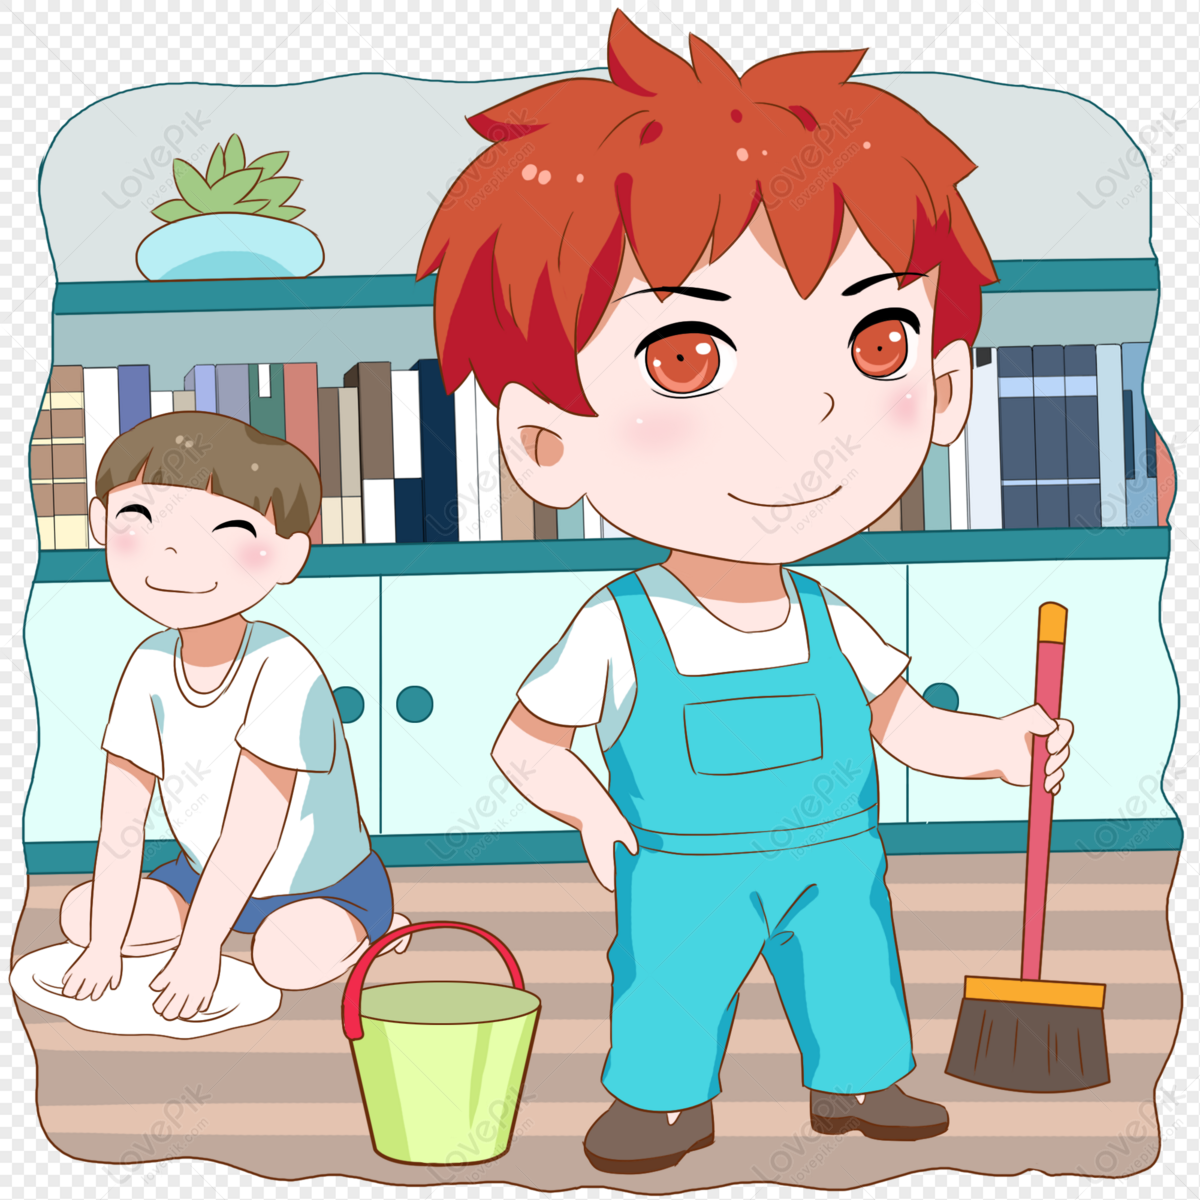 Man Tidying Up Housework PNG Picture And Clipart Image For Free